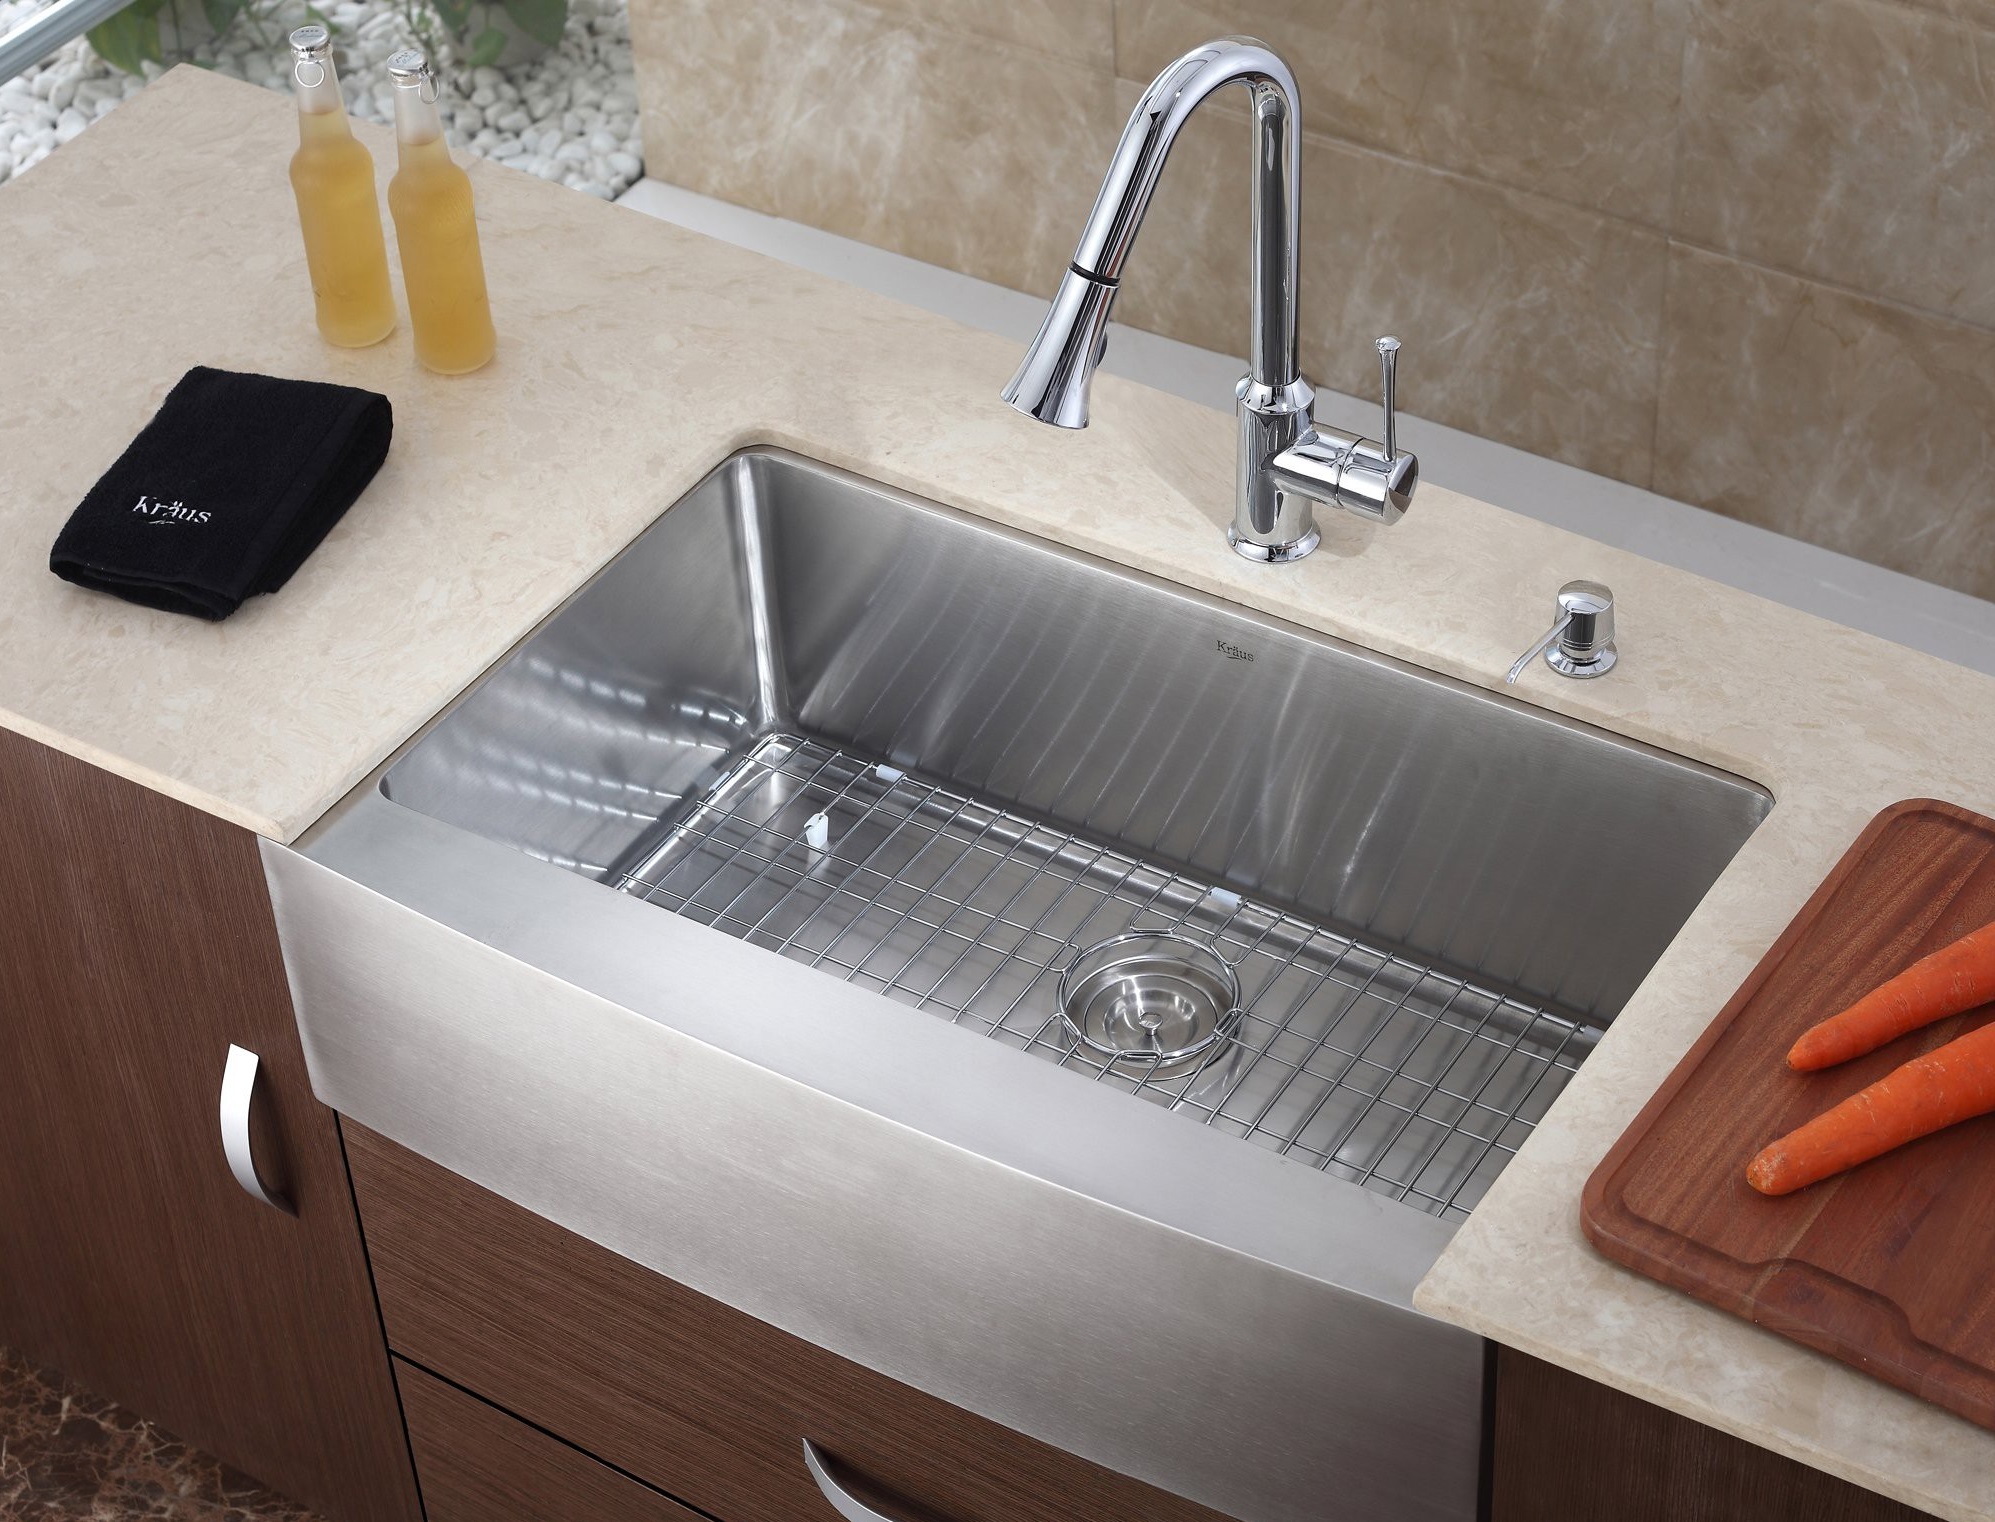 Glossy Sink Steel Wide Glossy Sink And Stainless Steel Kitchen Faucet On Wooden Counter And Quartz Top Kitchens 10 Stainless Steel Kitchen Faucet To Complement The Functionality